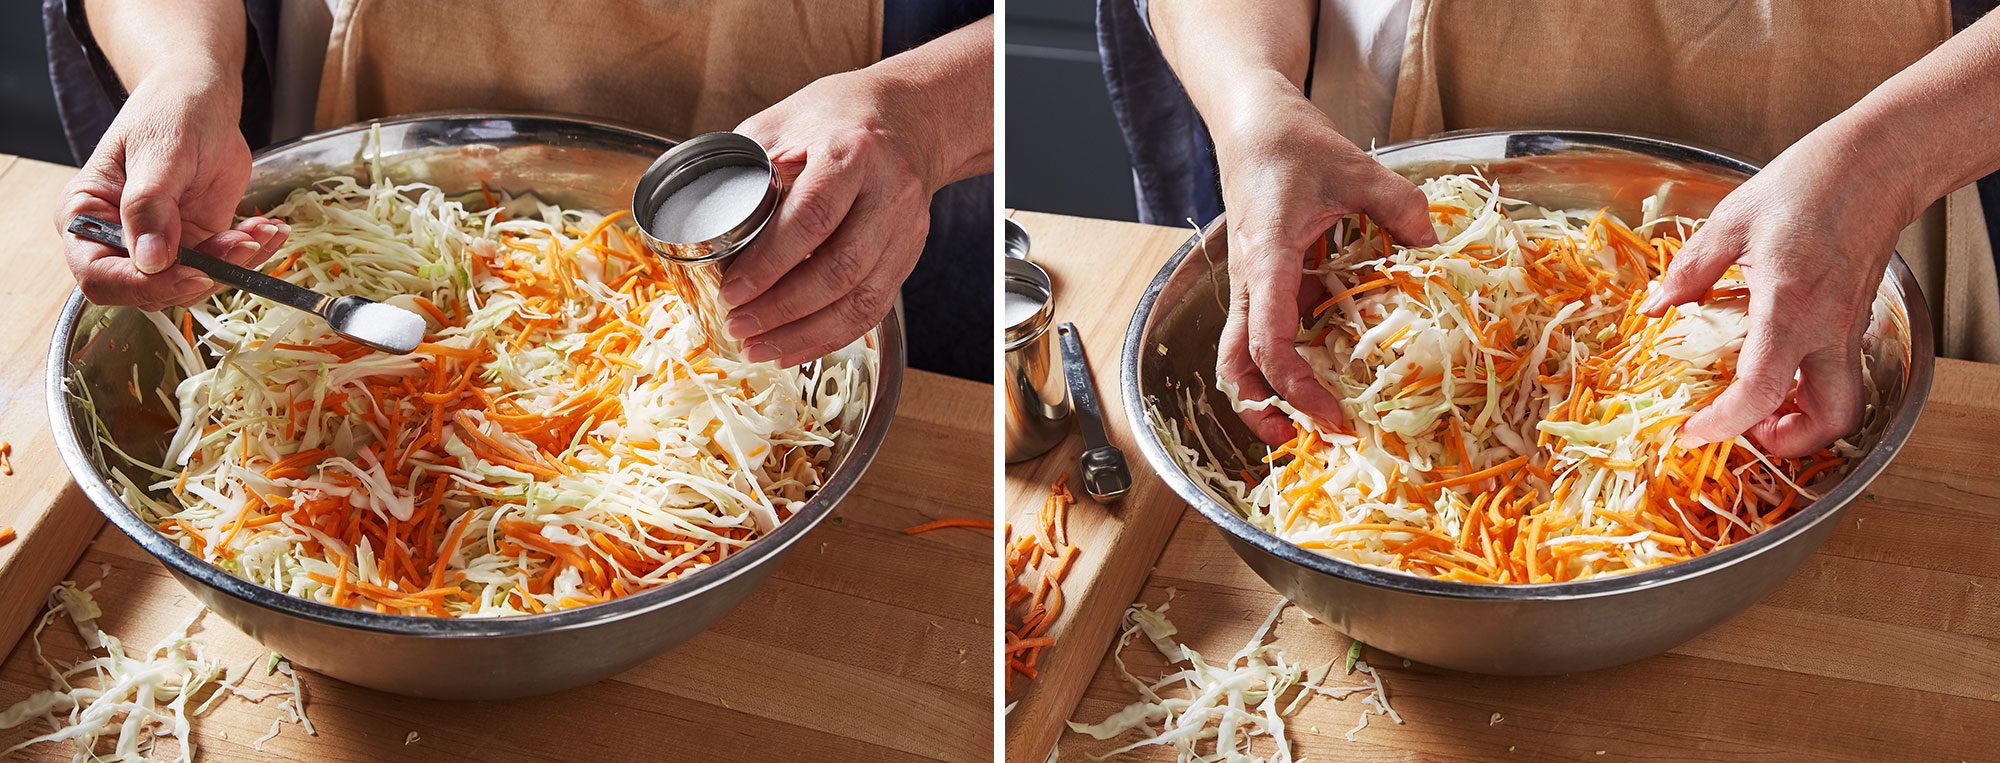 Image left: Adding salt to the sauerkraut ingredients in a bowl. Image right: Hand mixing sauerkraut ingredients in a bowl.